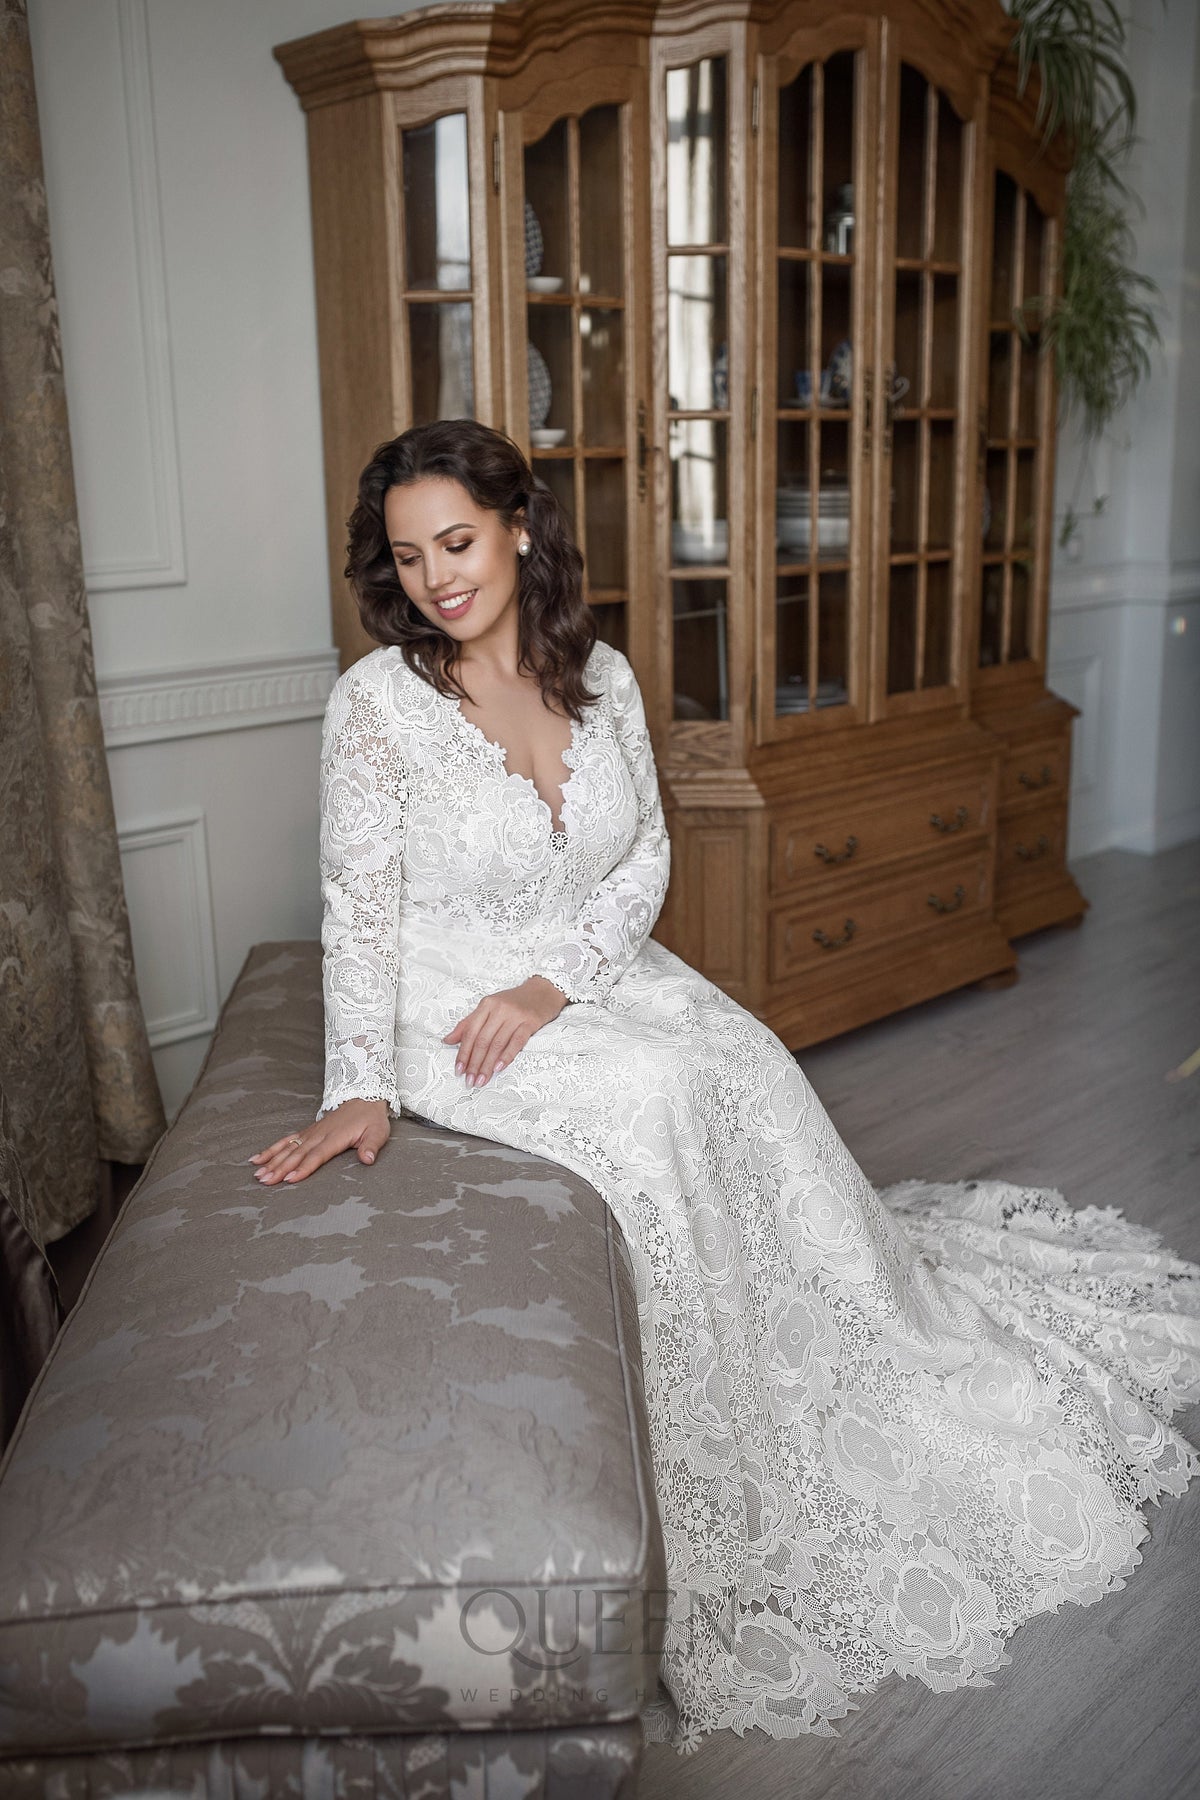 Beautiful ALine Long Sleeve All Over Lace Macrame Deep V Neckline Wedding Dress Bridal Gown with Lace Train and Corset Long Sleeve